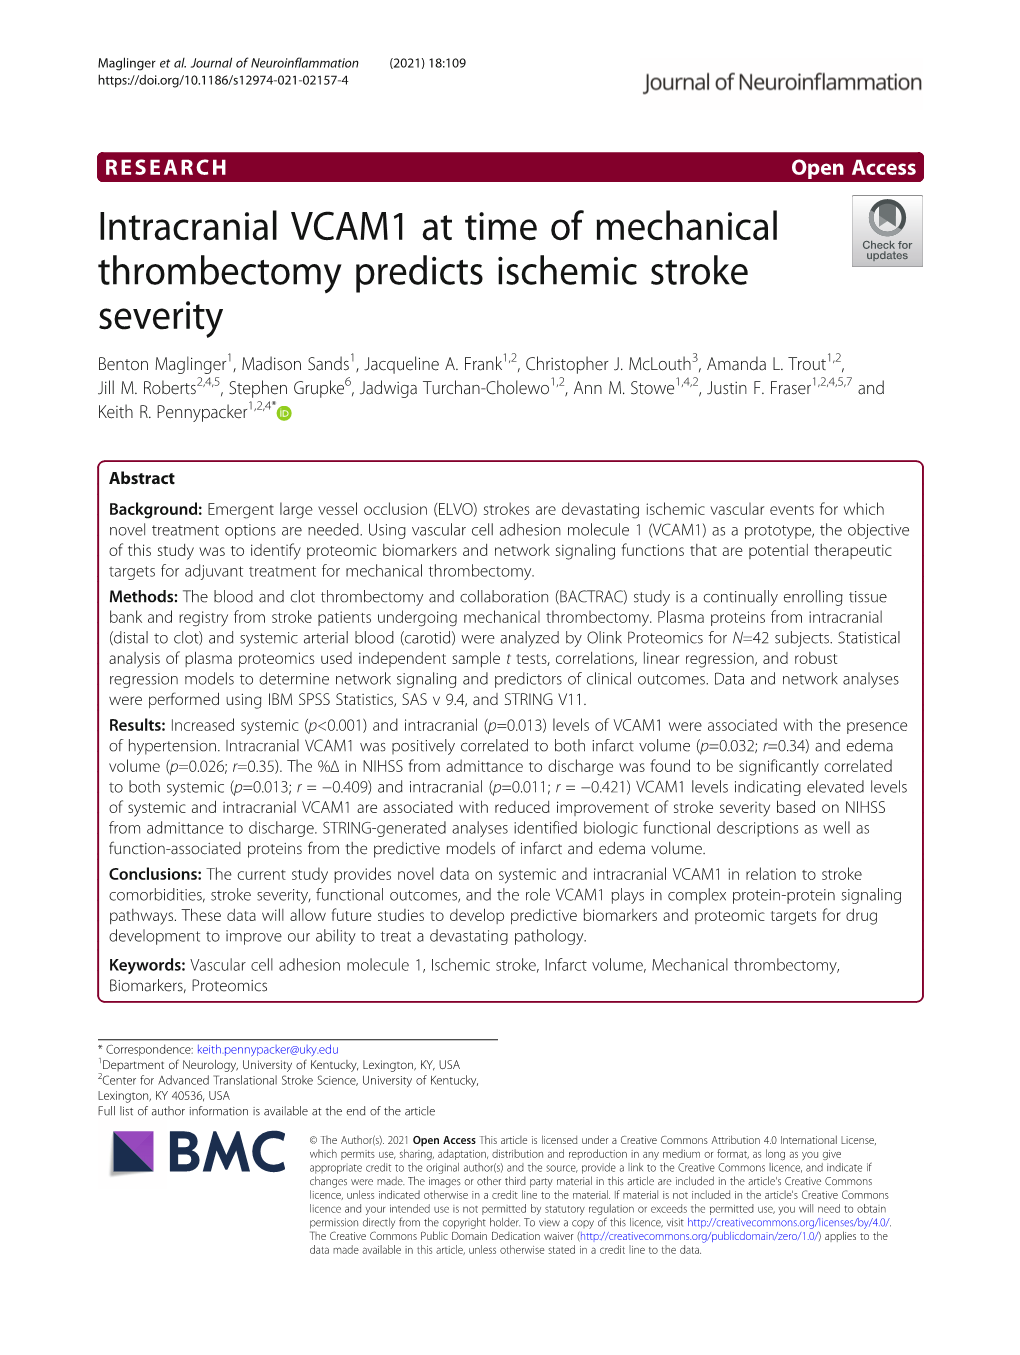 Intracranial VCAM1 at Time of Mechanical Thrombectomy Predicts Ischemic Stroke Severity Benton Maglinger1, Madison Sands1, Jacqueline A